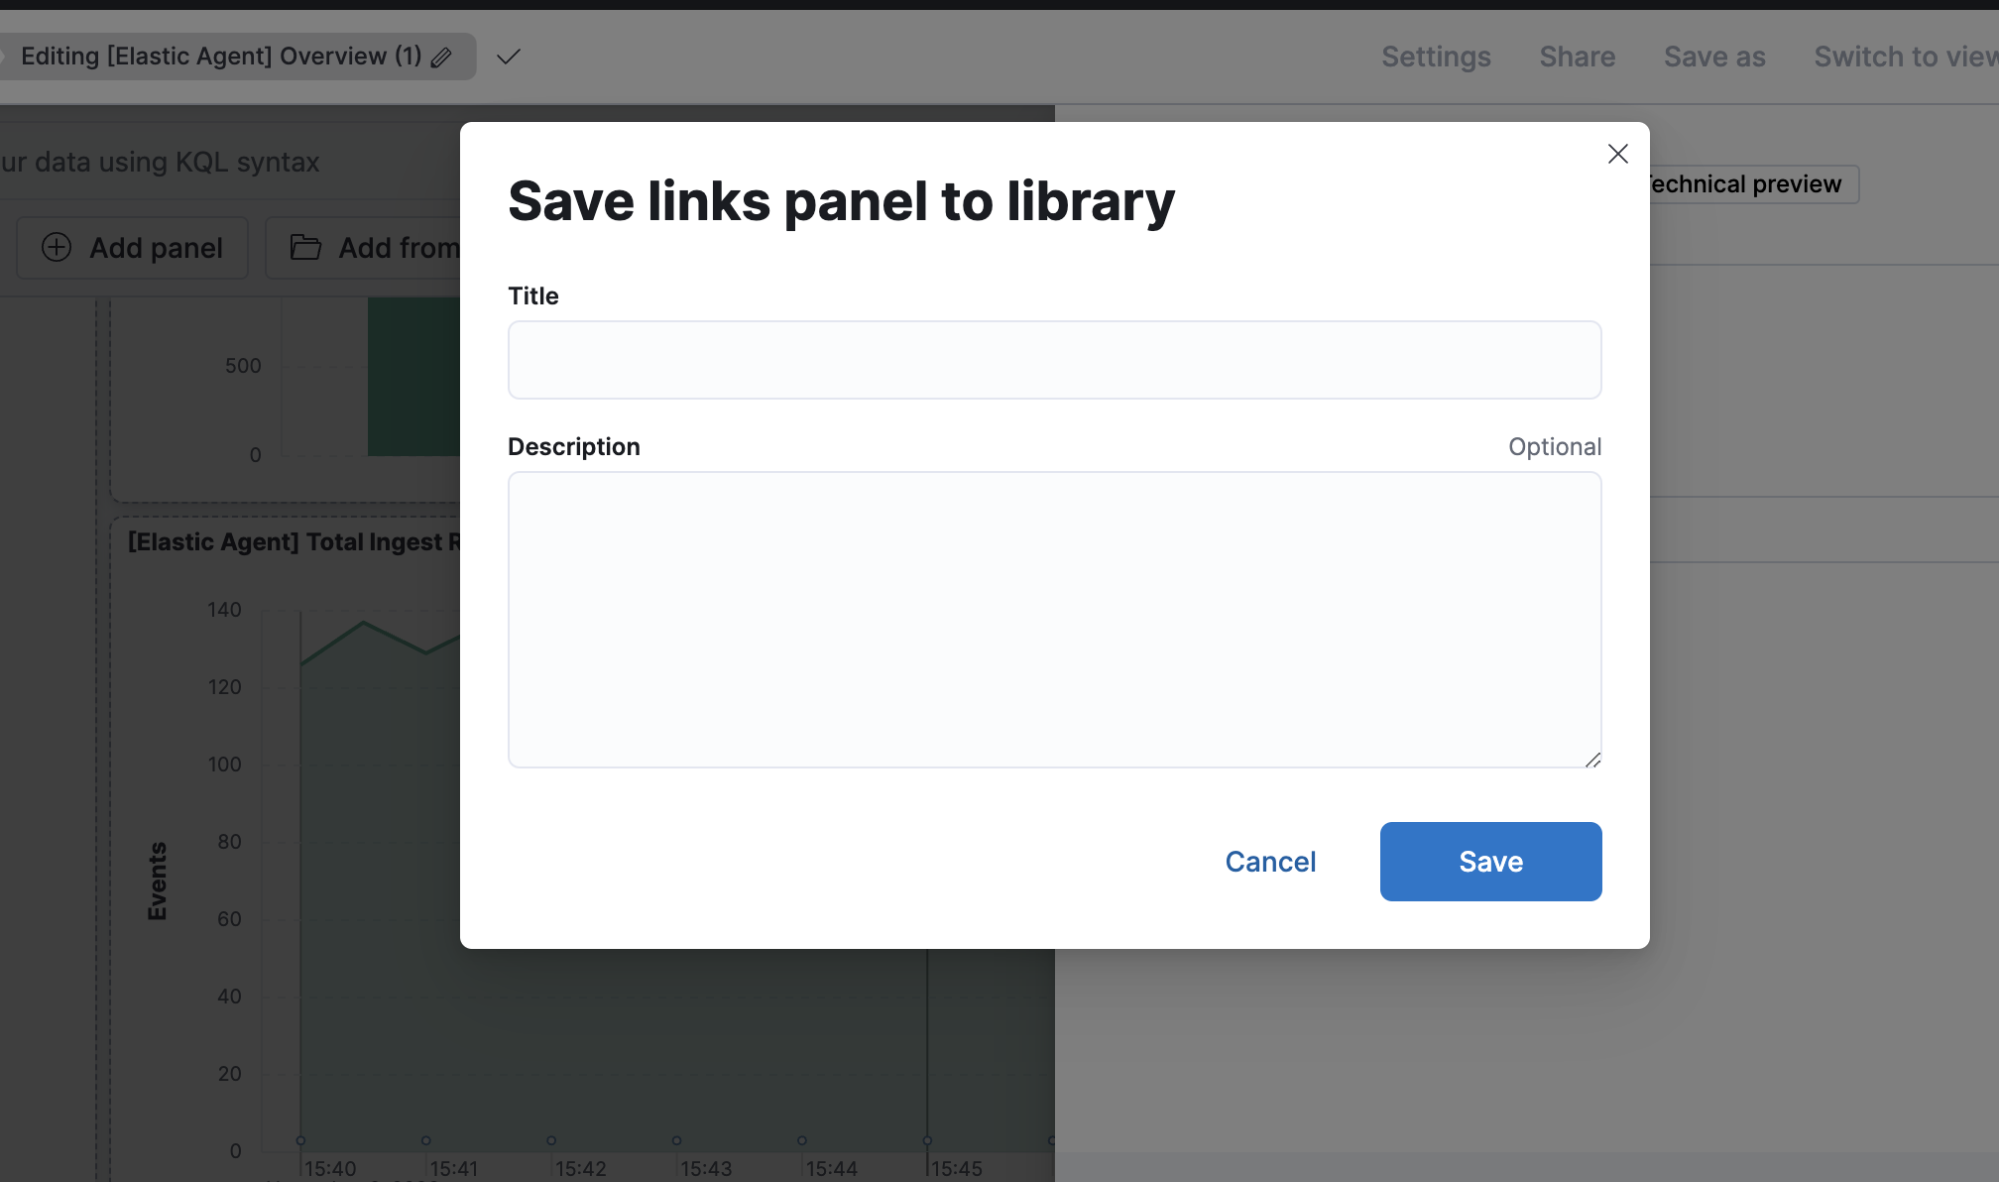 7. -save links panel to library